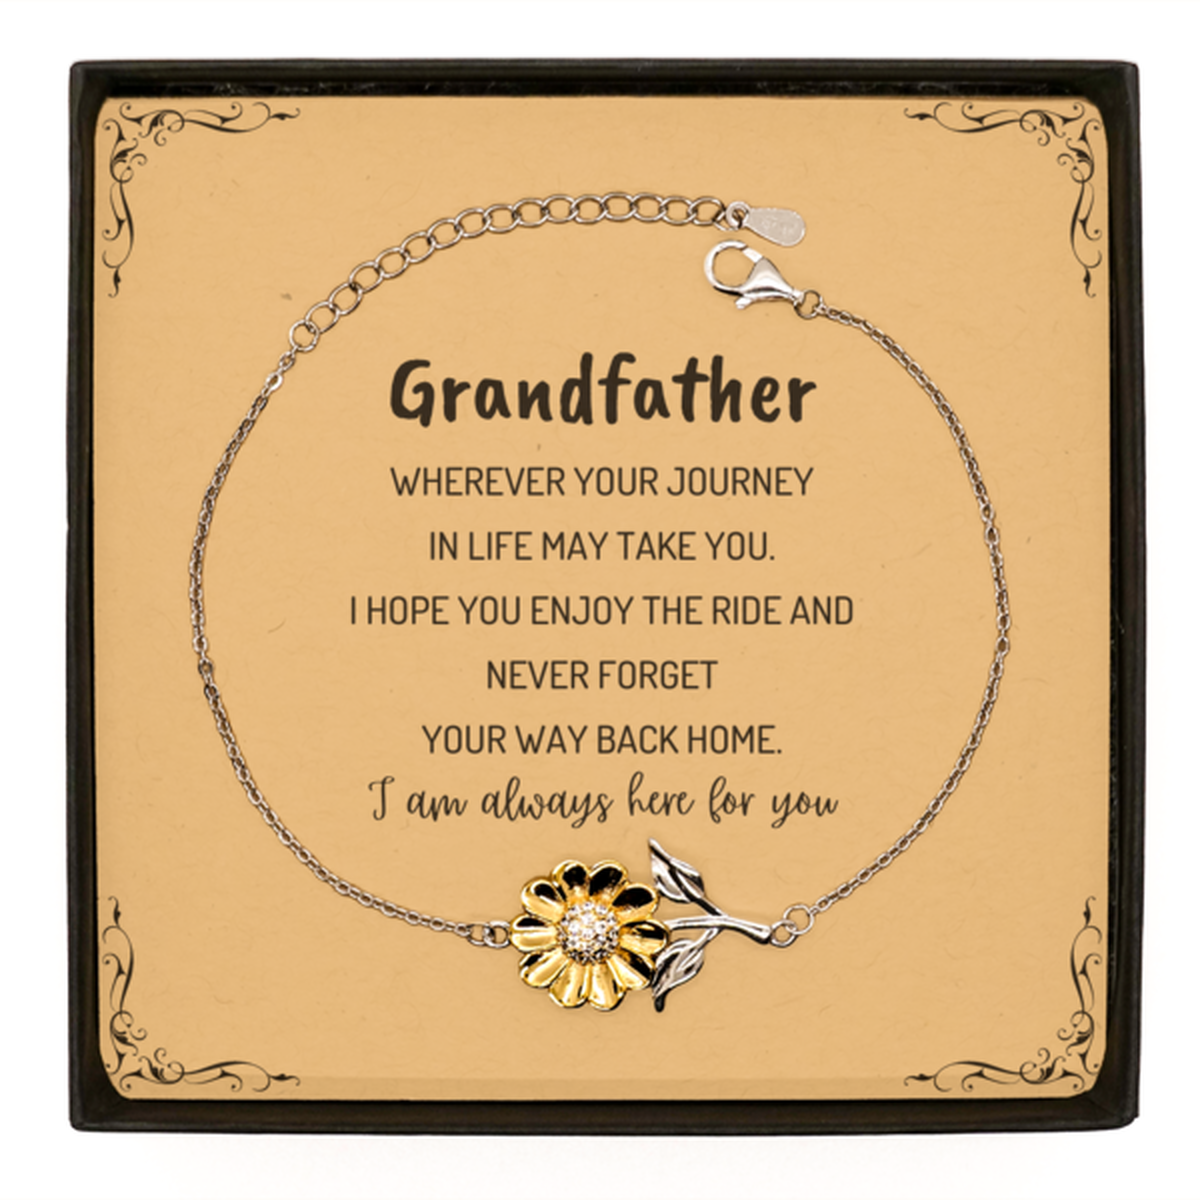 Grandfather wherever your journey in life may take you, I am always here for you Grandfather Sunflower Bracelet, Awesome Christmas Gifts For Grandfather Message Card, Grandfather Birthday Gifts for Men Women Family Loved One